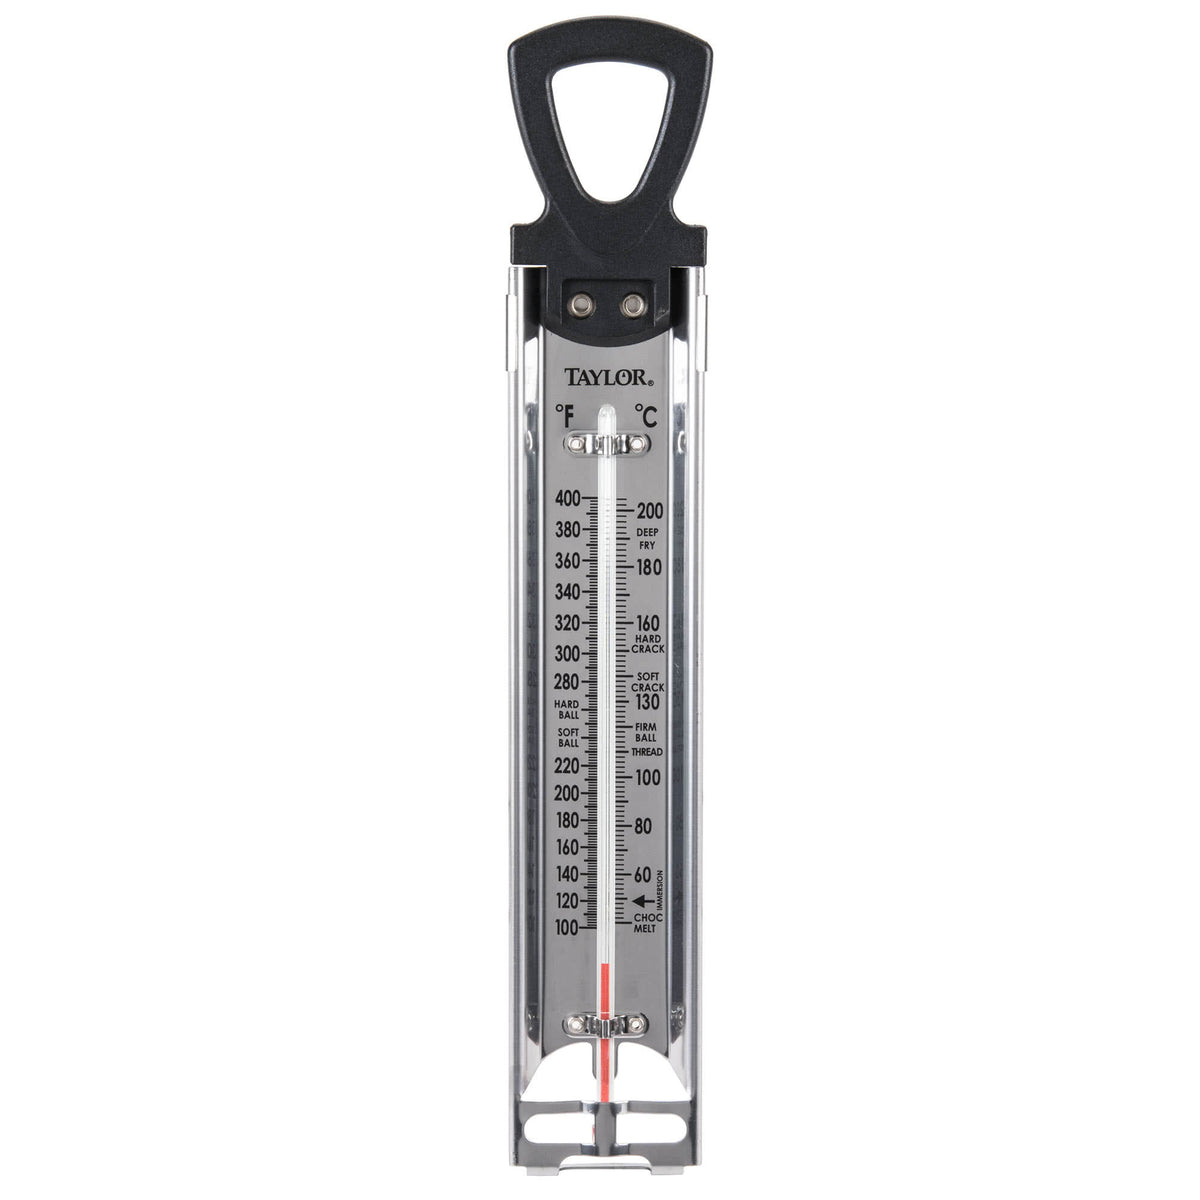 Taylor Home Candy & Deep Fry Thermometer